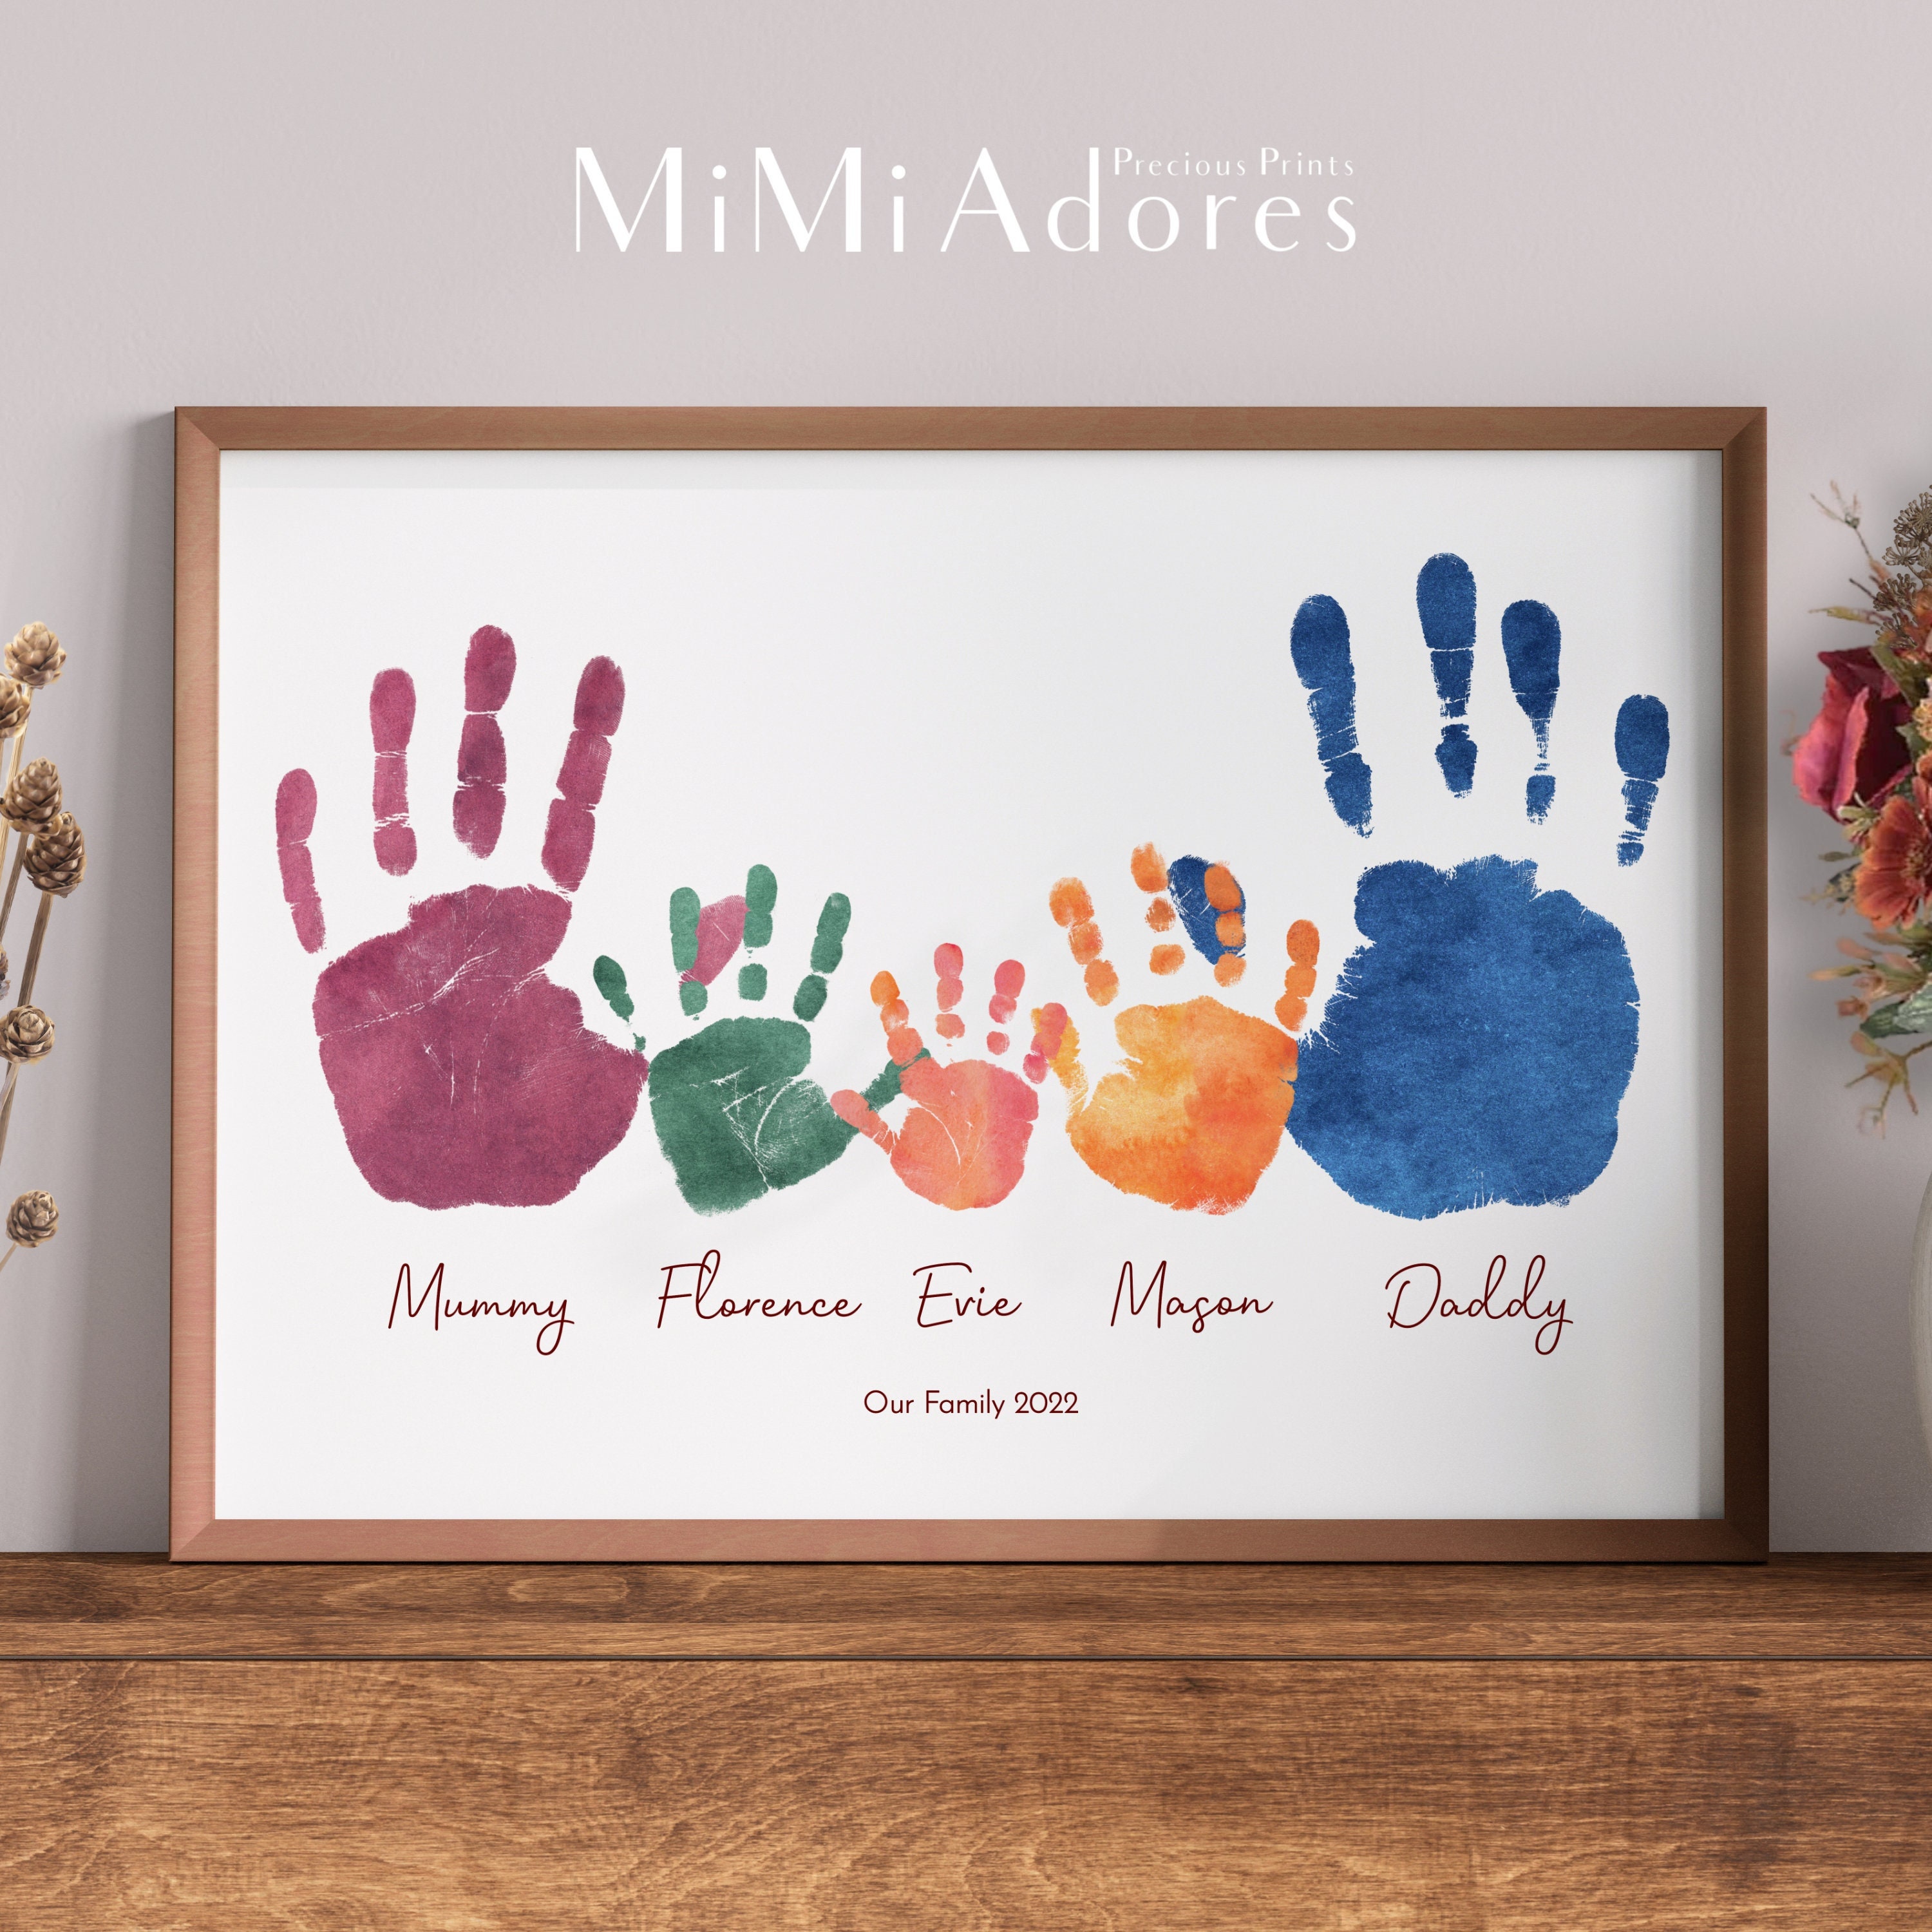 Family Handprint Embroidery Kit ~ Ages 5 +